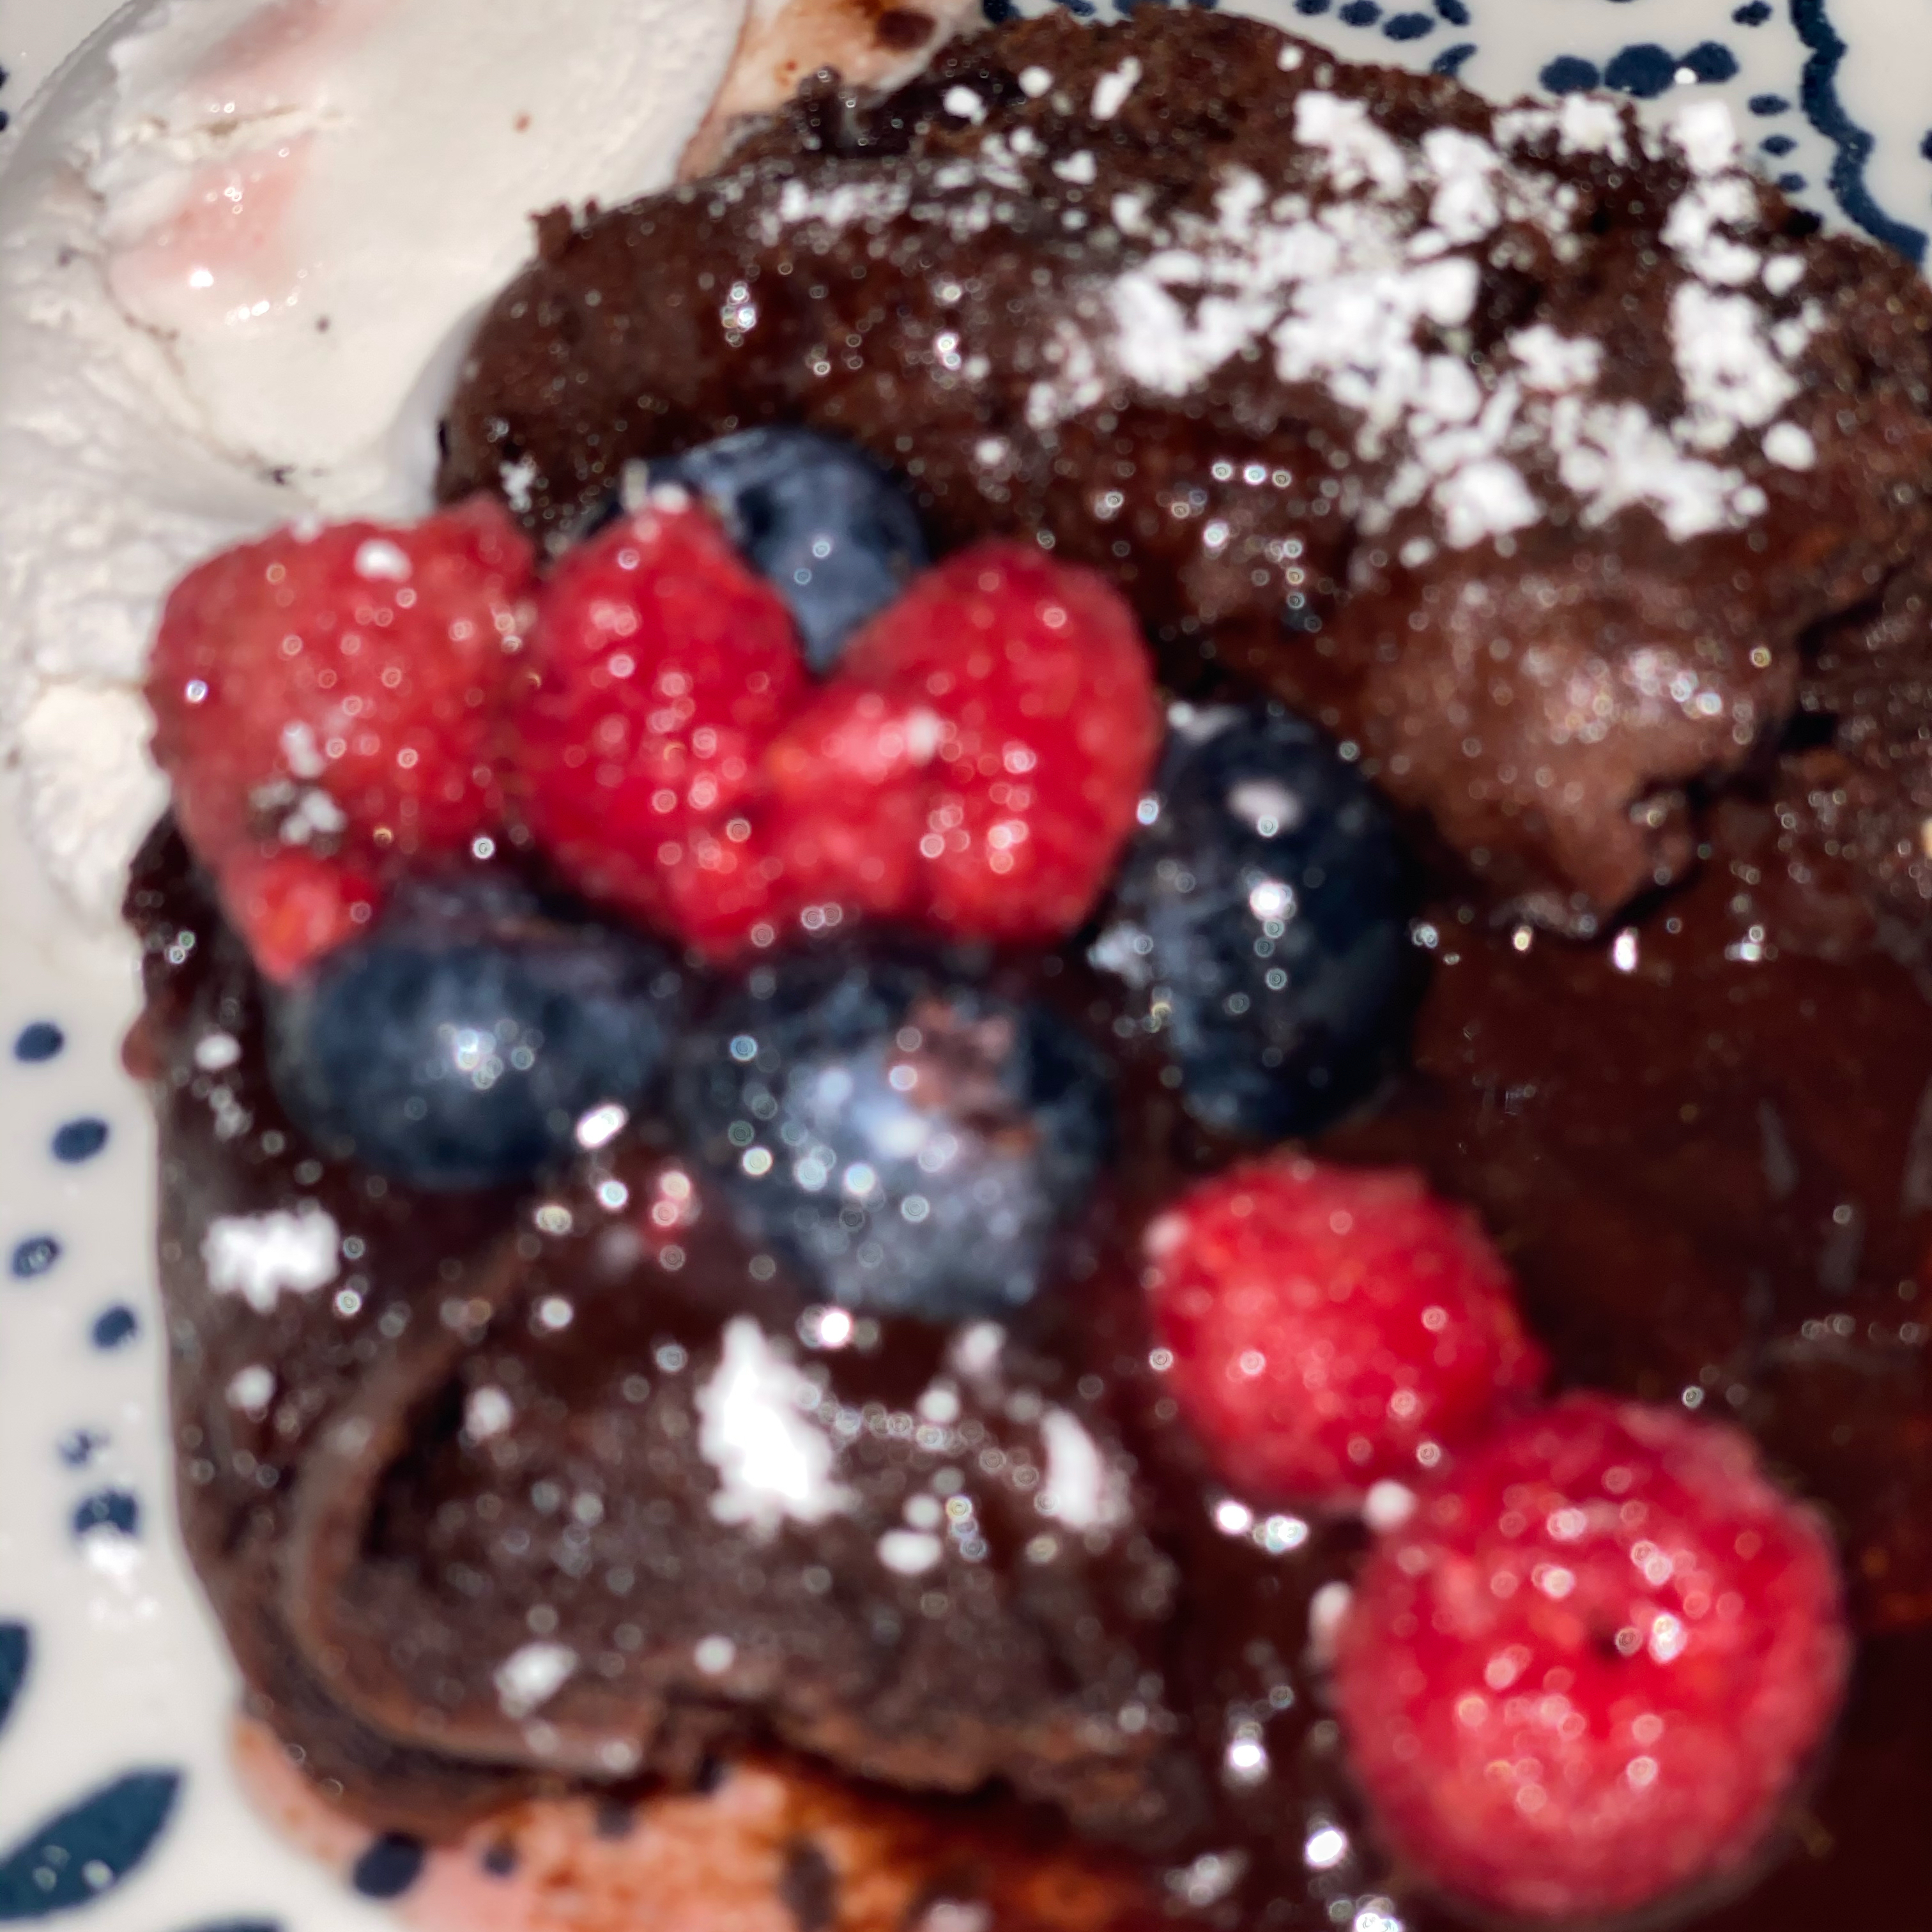 Molten Chocolate Cakes With Sugar-Coated Raspberries MistyR